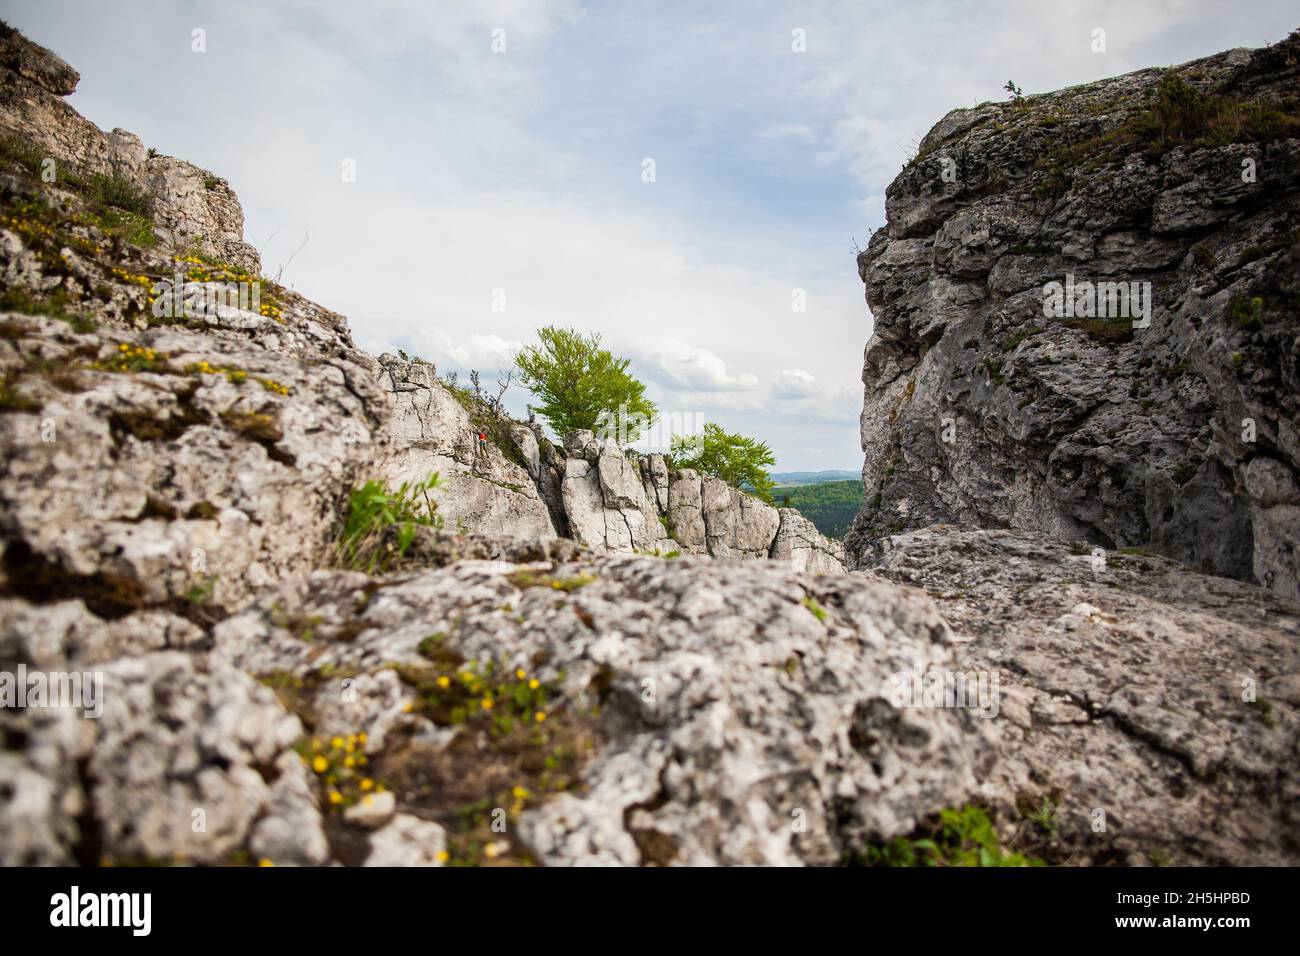 View at cliff peak, Landscape with man climbing on cliff walls with trees atop | Rock cliff peak landscape, ledge with plants and trees on summer Stock Photo